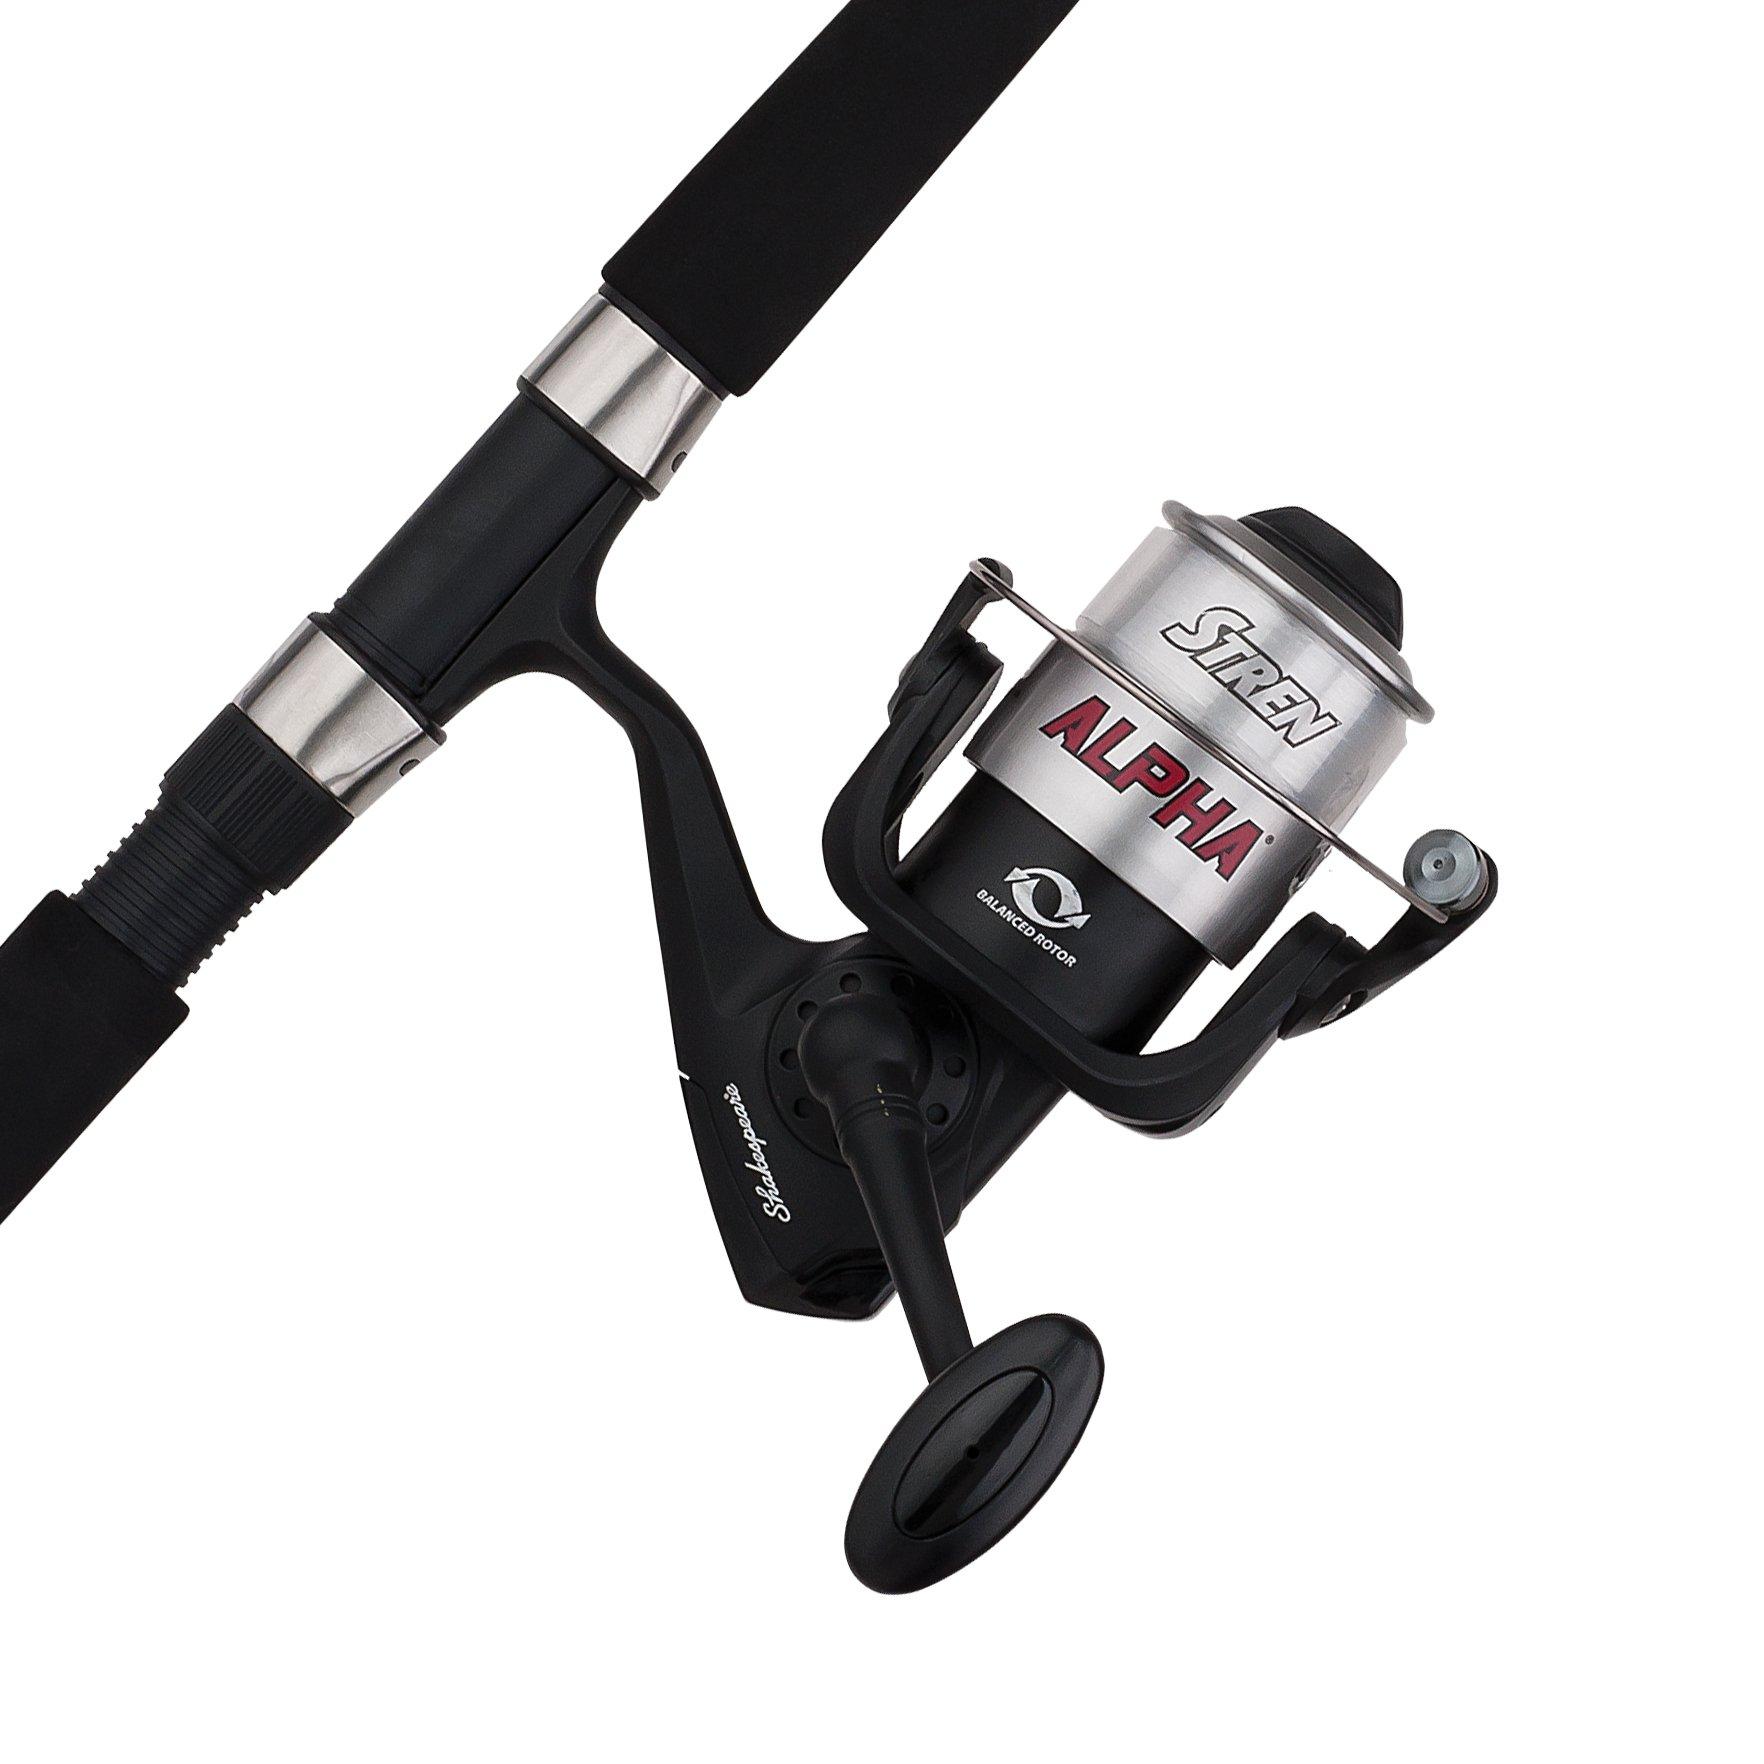 Shakespeare Light Alpha Spin Reel Blister - Fishing Reel Accessory/high  Quality at OutdoorShopping